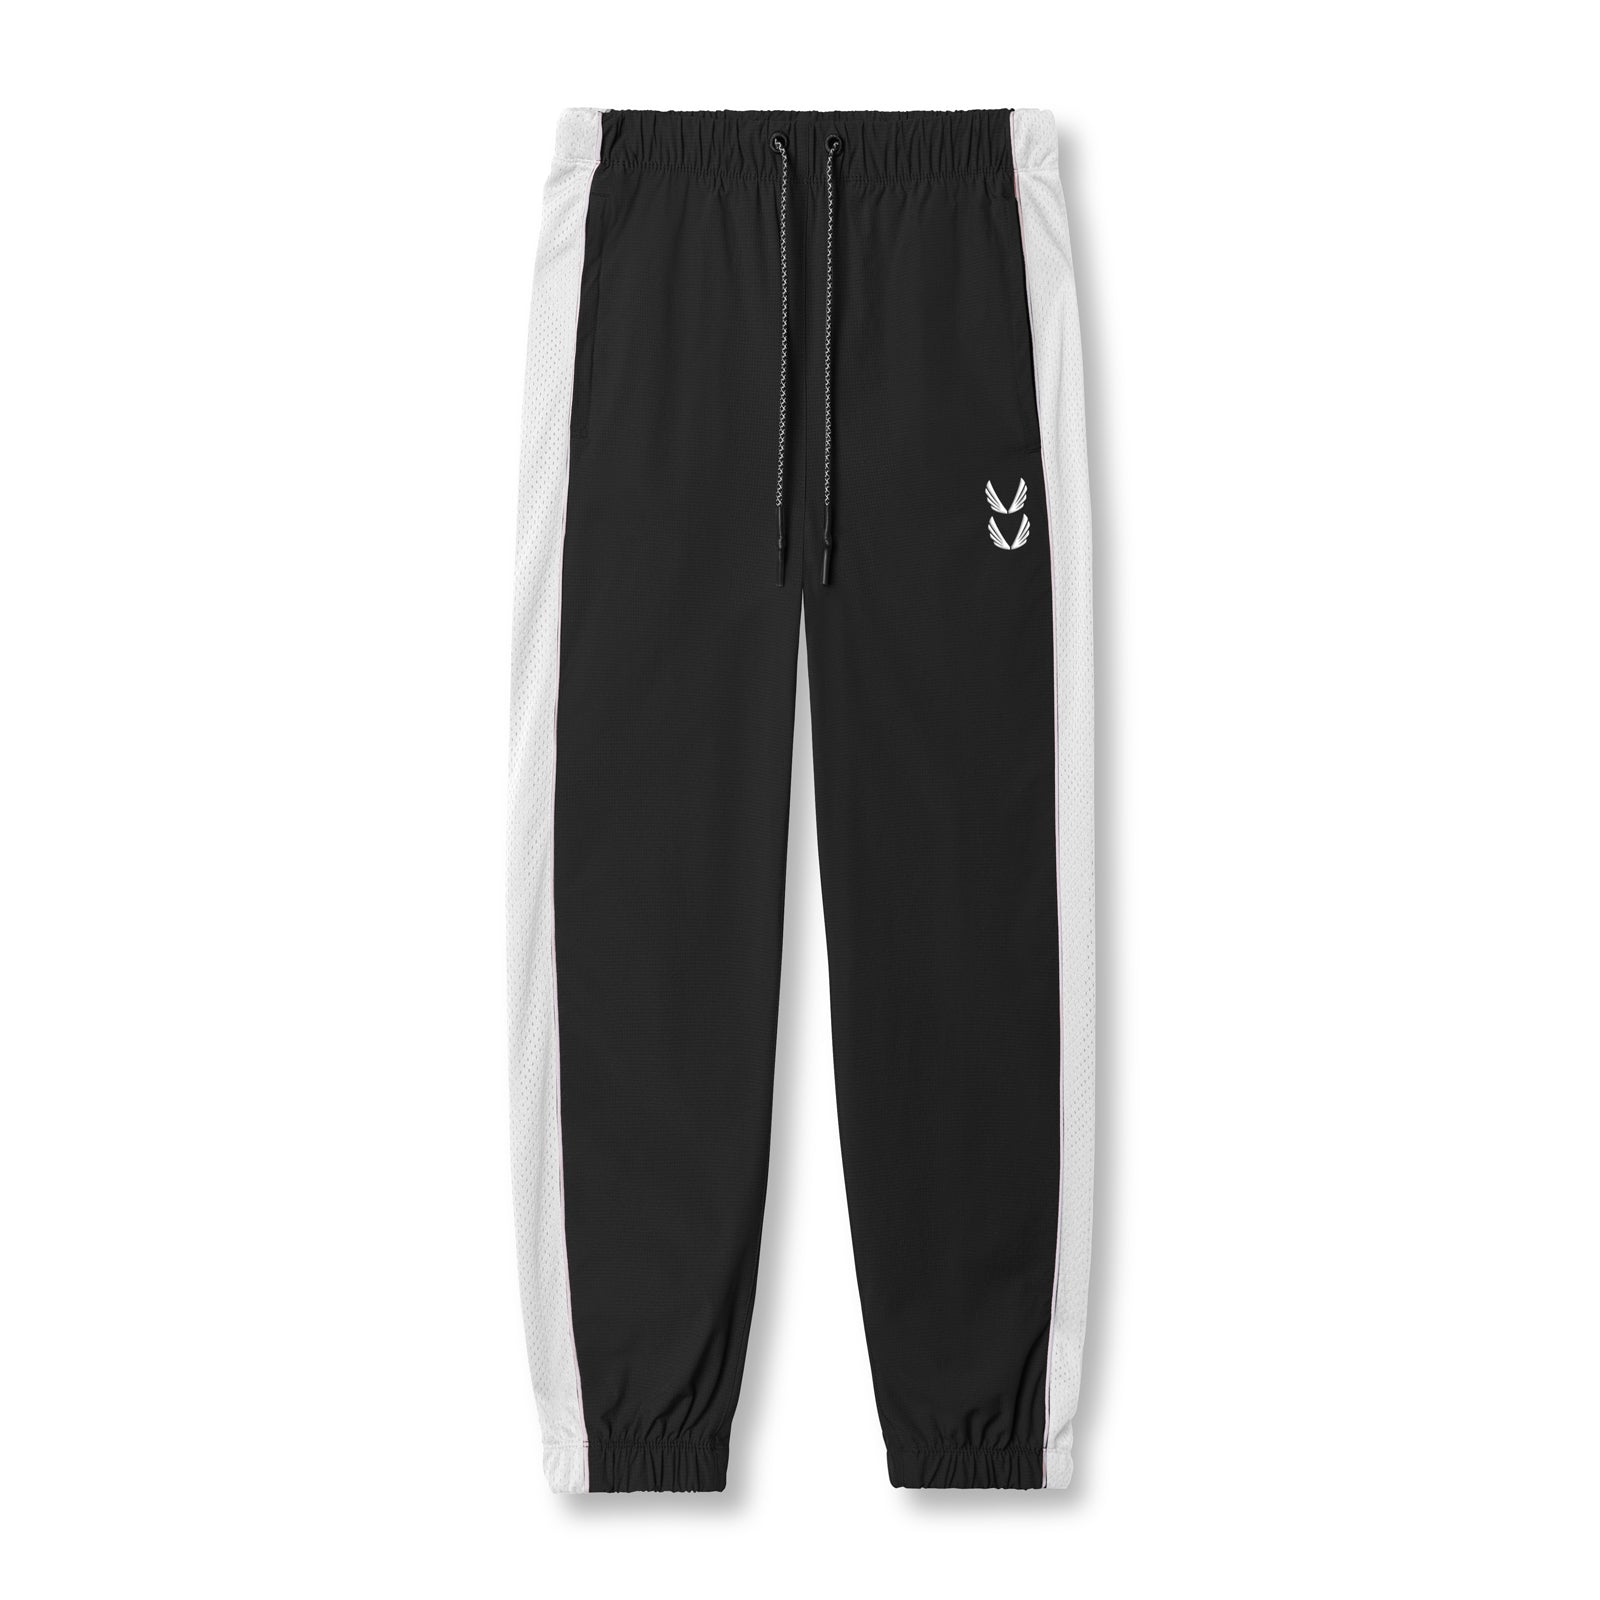 ASRV Ripstop Oversized Track Pant - Black - Due West